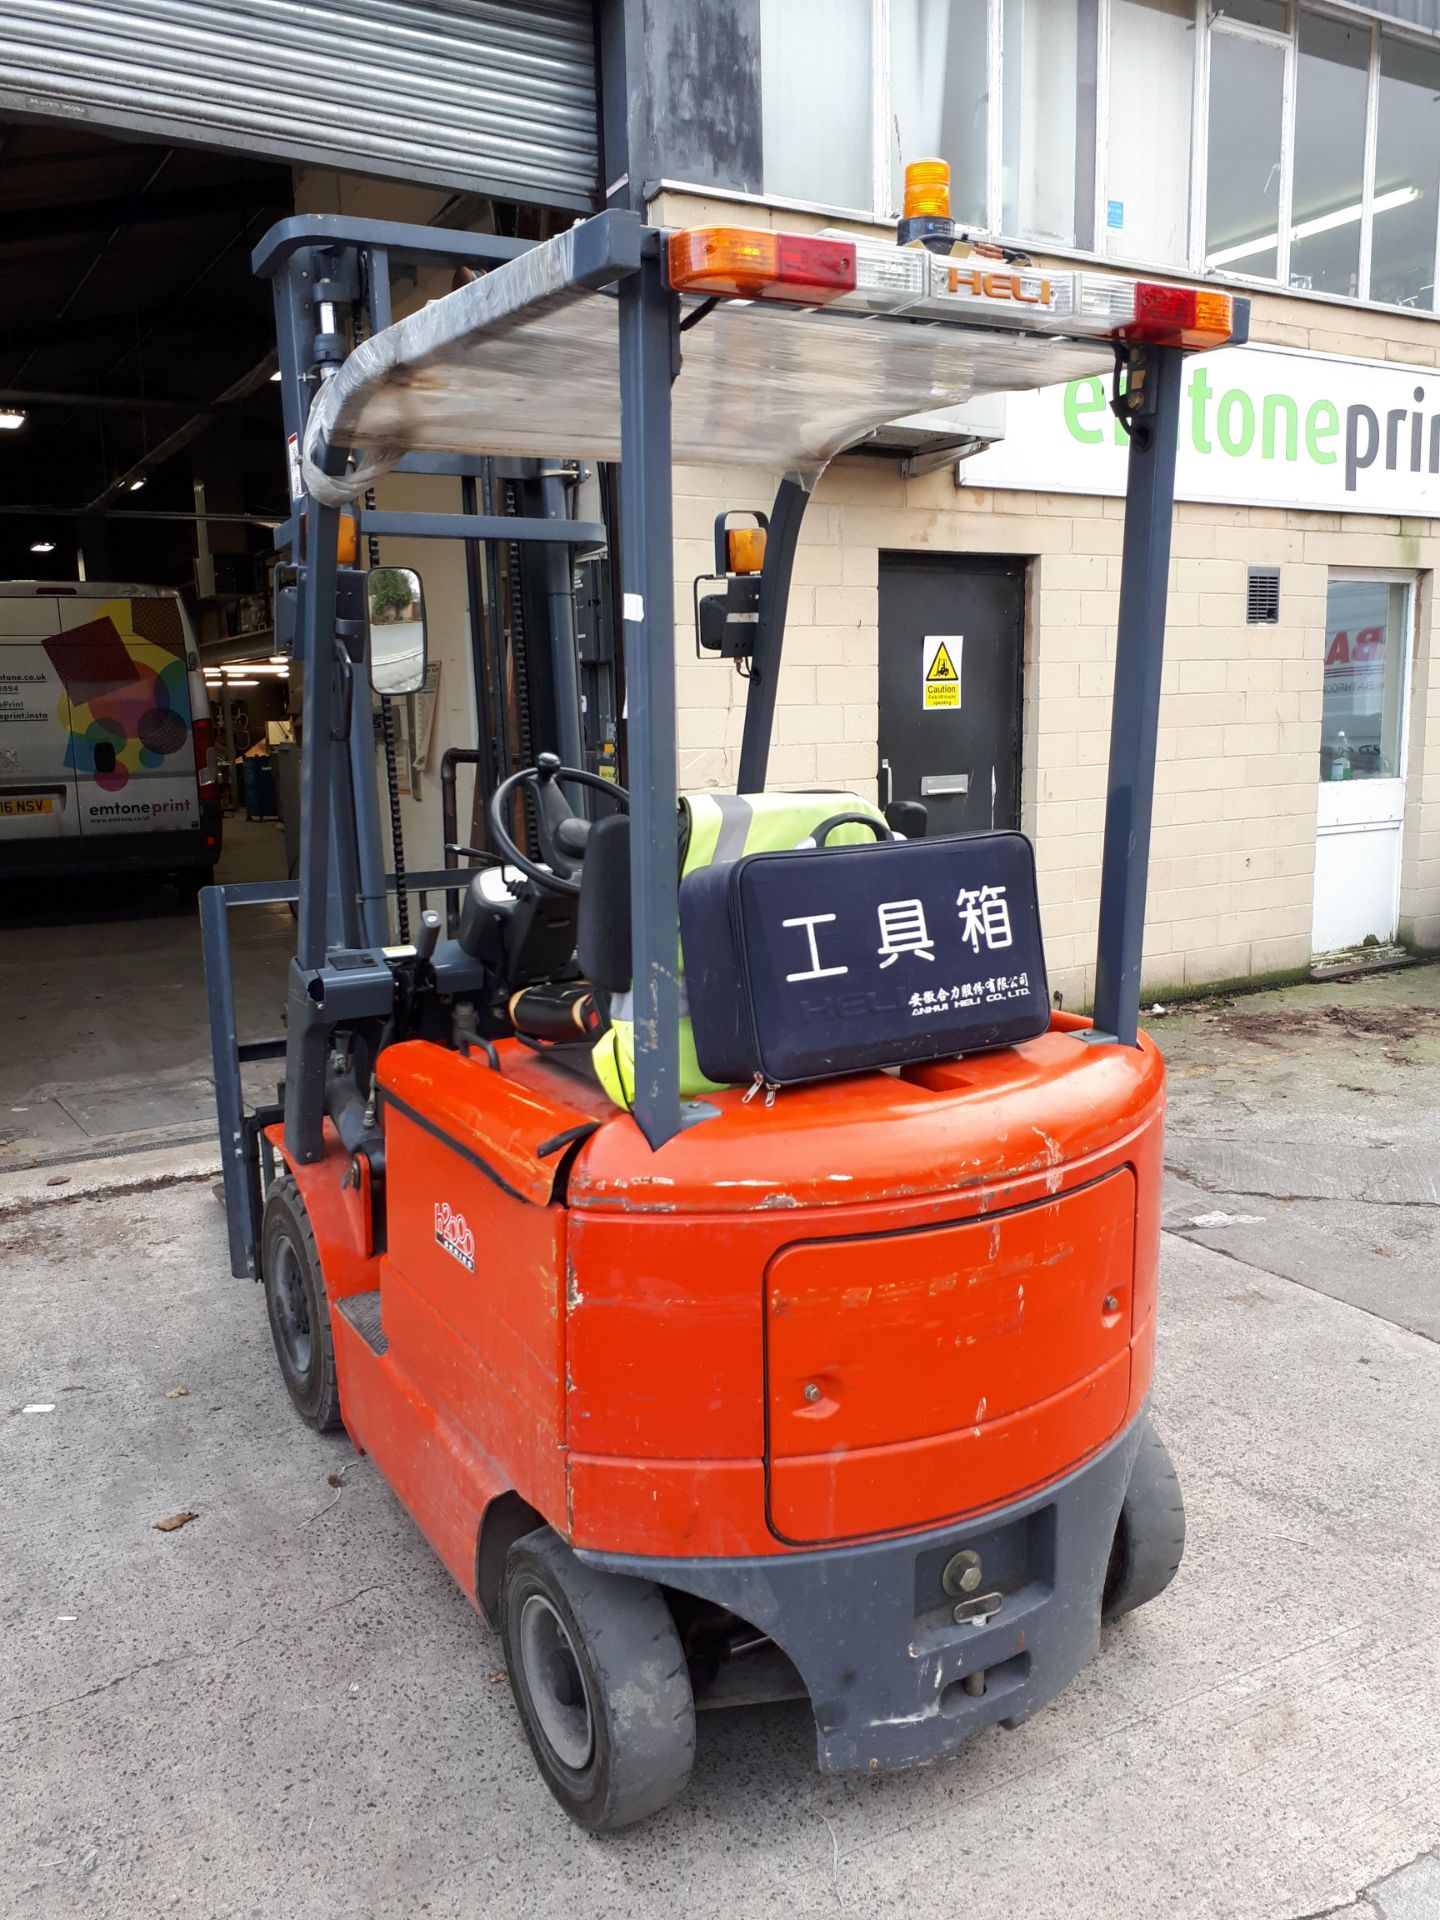 Heli HFP15 1.5Ton Electric Forklift Truck, Twin Stage Mast, Serial Number G3355 (2009) 1,566.0 - Image 6 of 10